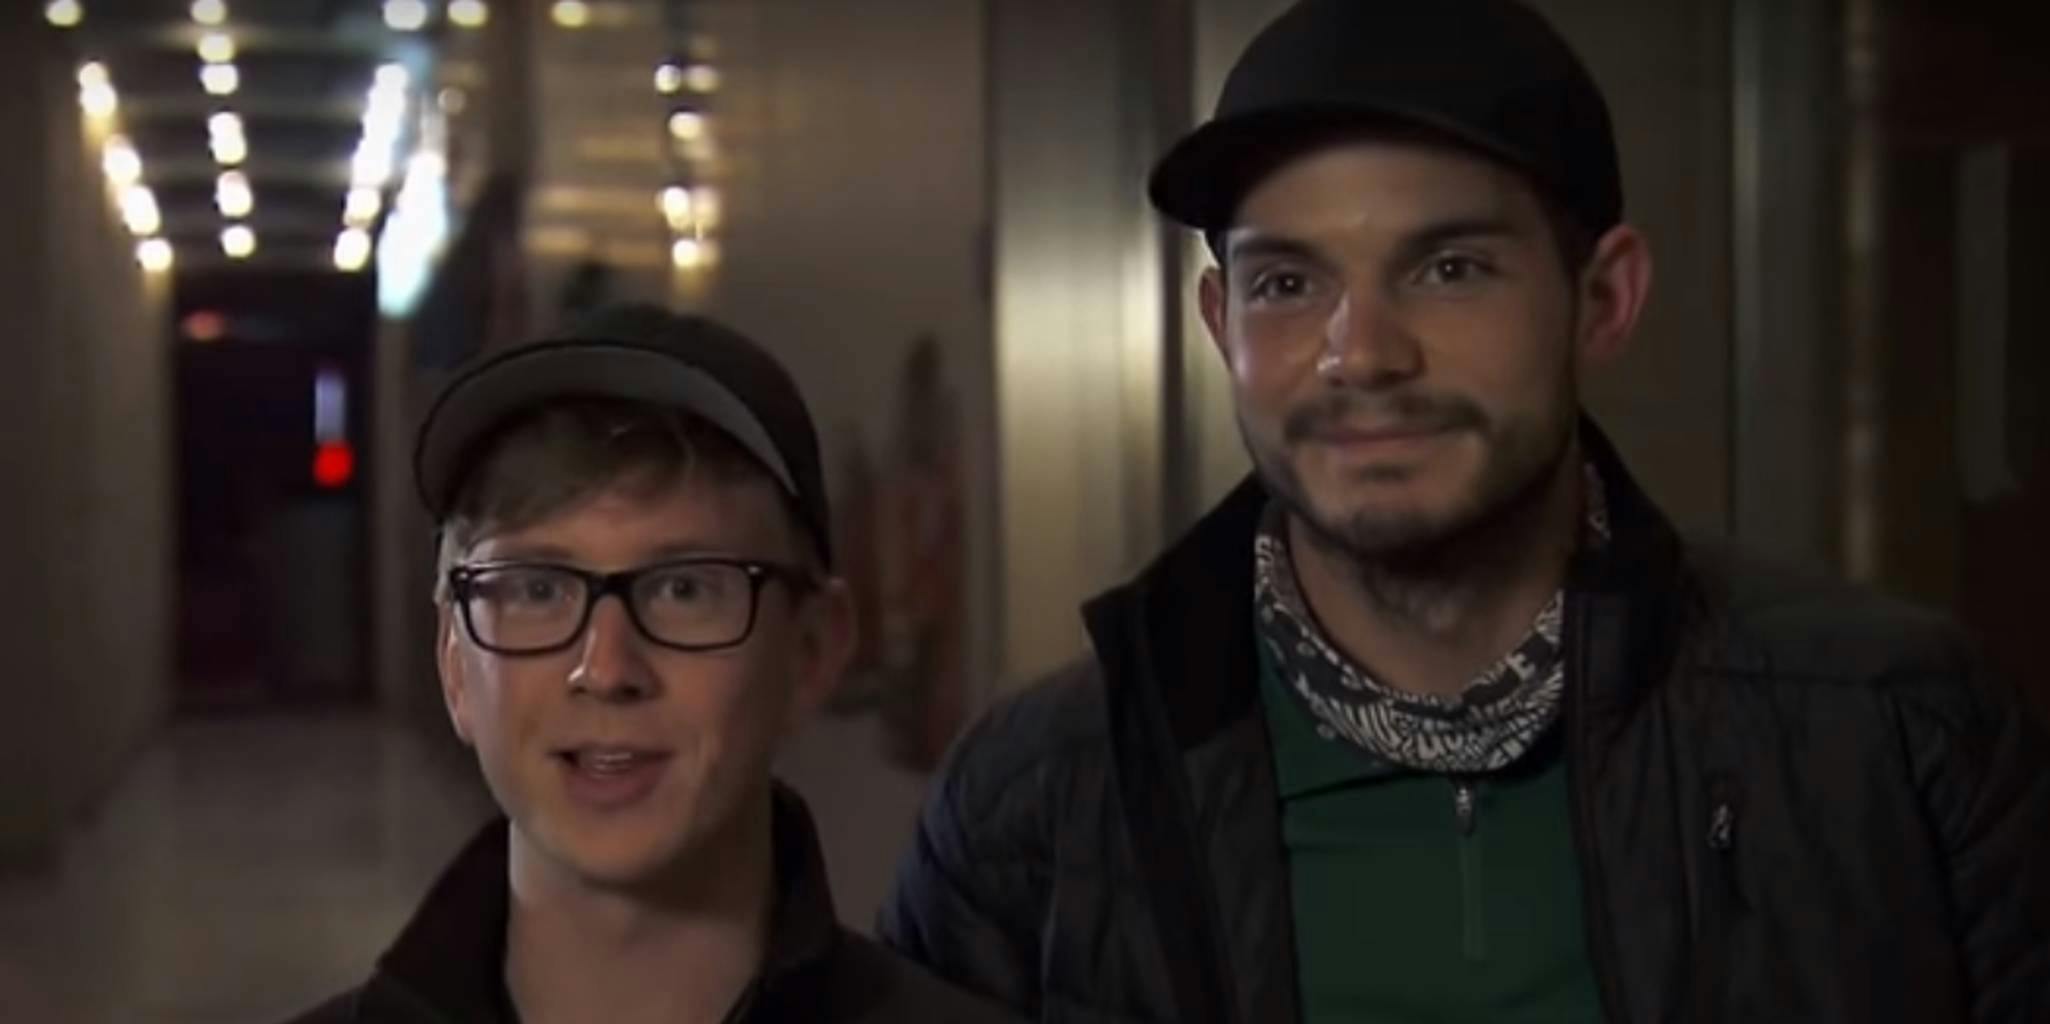 Is Tyler Oakley a lock to win the 'Amazing Race' finale? - The Daily Dot